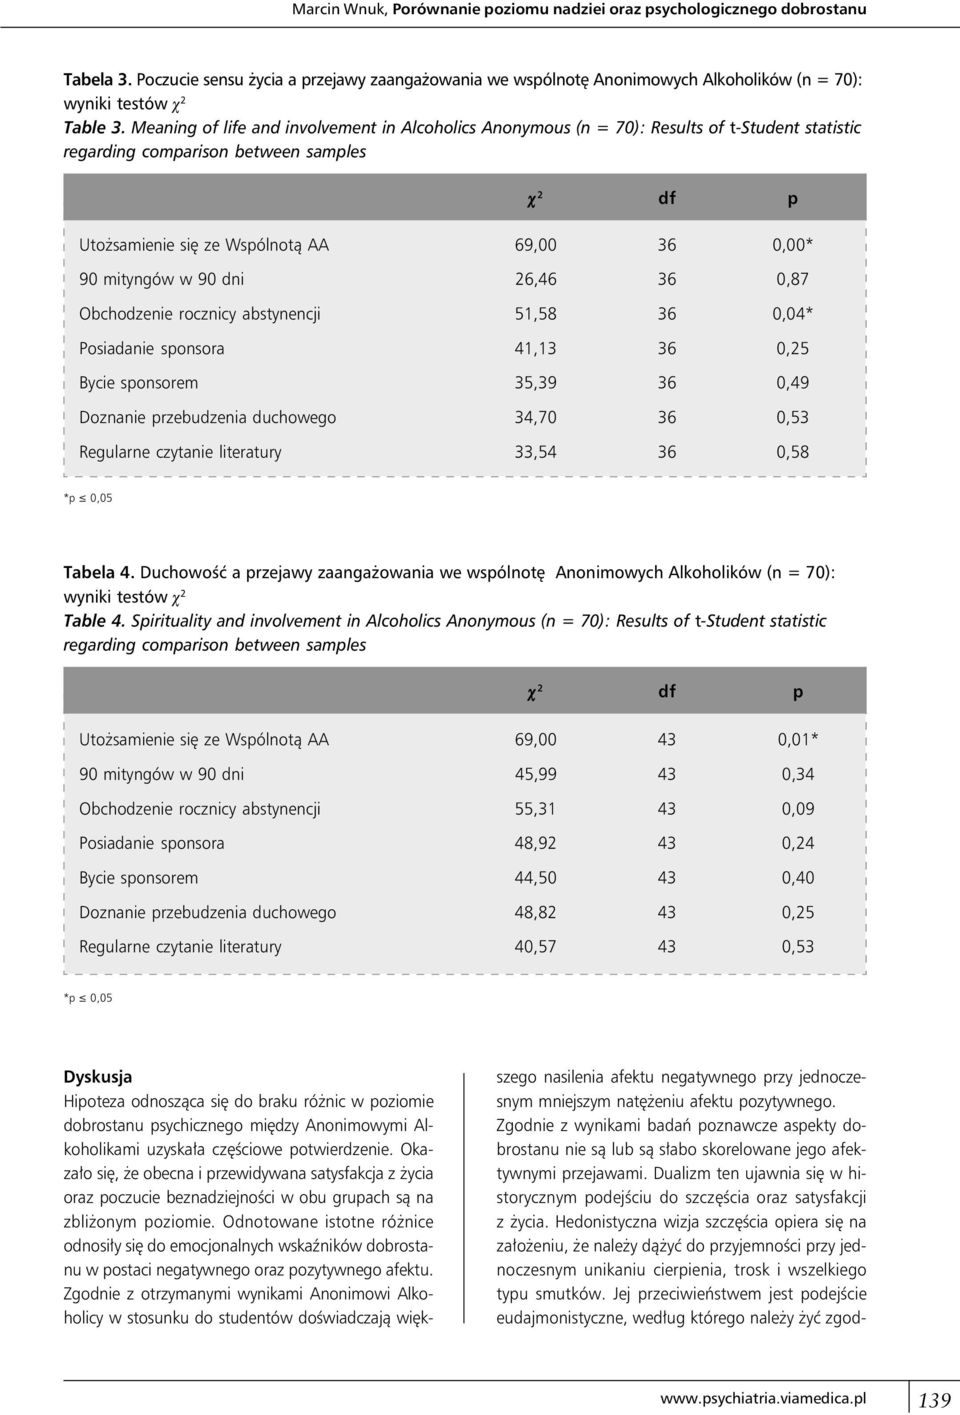 Meaning of life and involvement in Alcoholics Anonymous (n = 70): Results of t-student statistic regarding comparison between samples c 2 df p Utożsamienie się ze Wspólnotą AA 69,00 36 0,00* 90